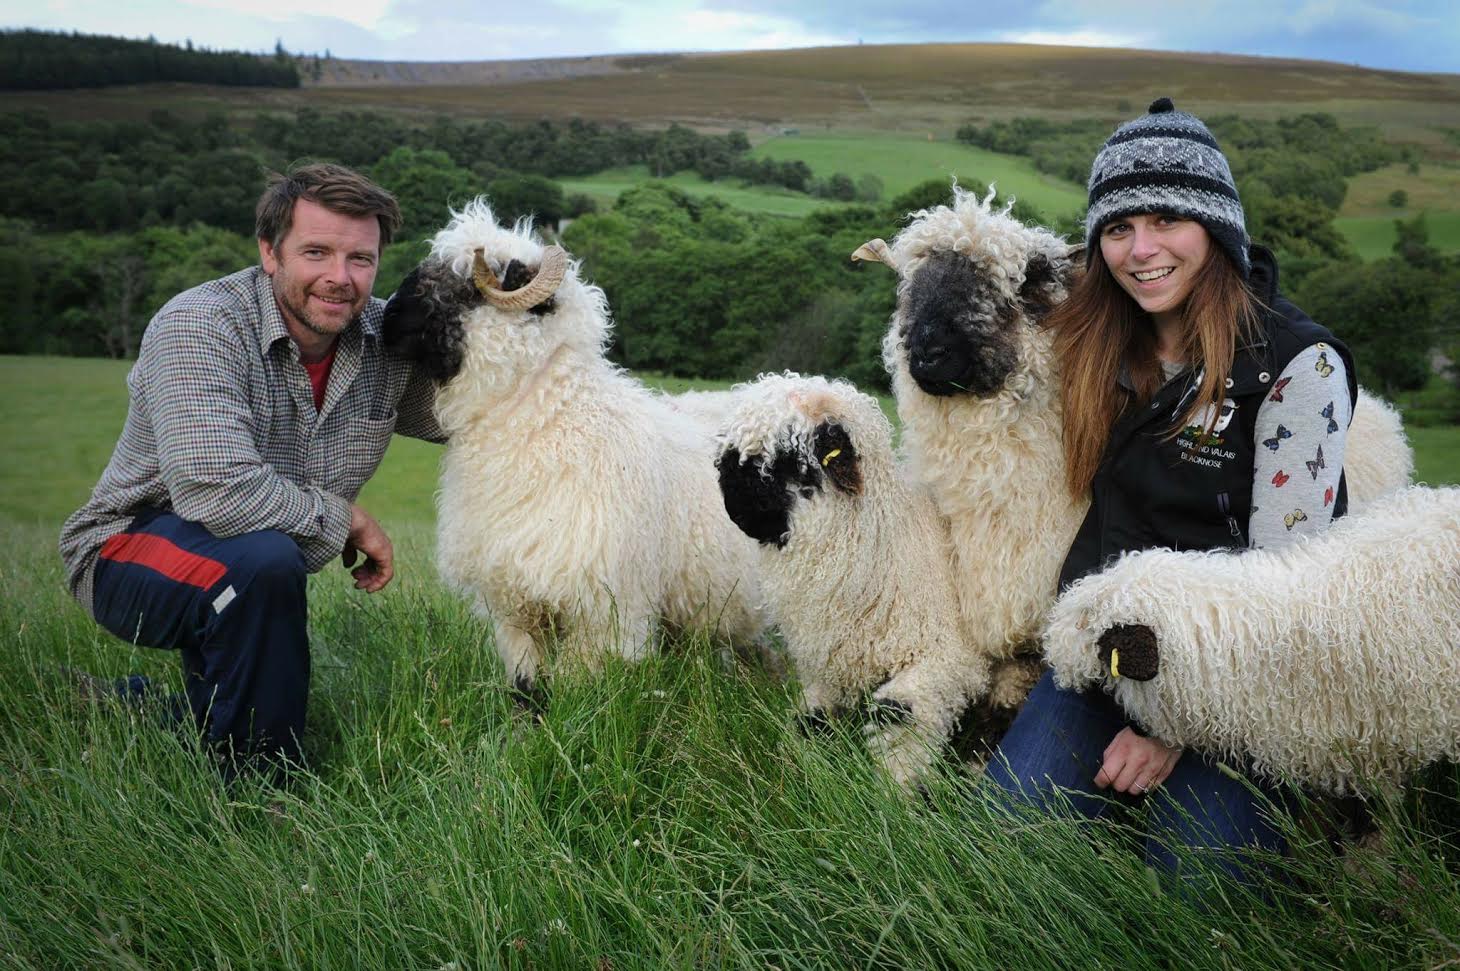 Valais Blacknose Sheep Society was formed by Jenni McAllister and Raymond Irvine to protect the breed